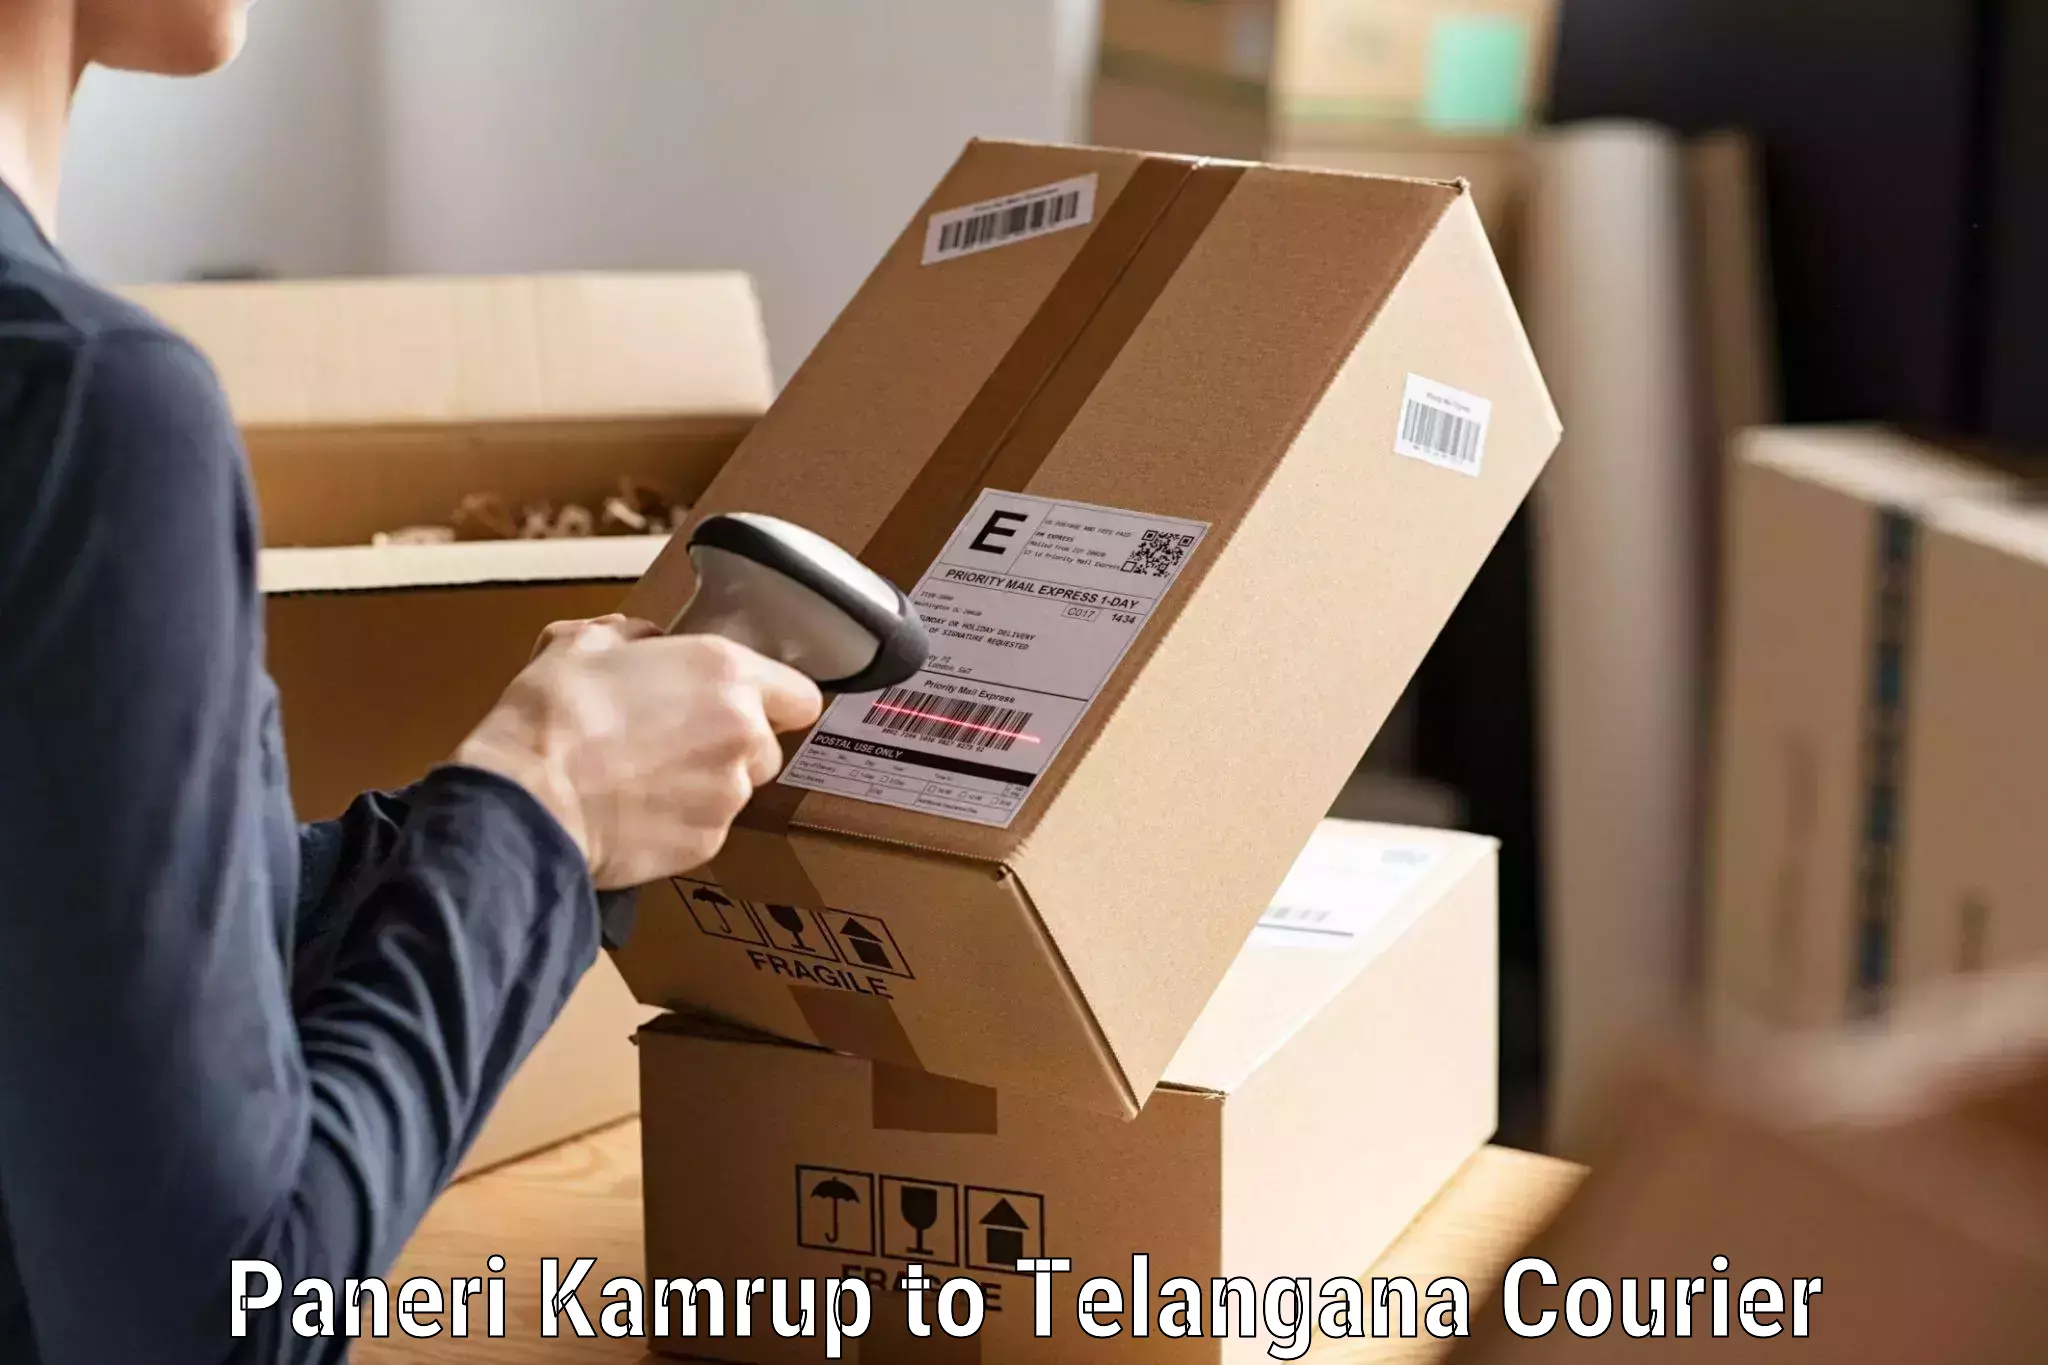 Reliable parcel services Paneri Kamrup to Secunderabad